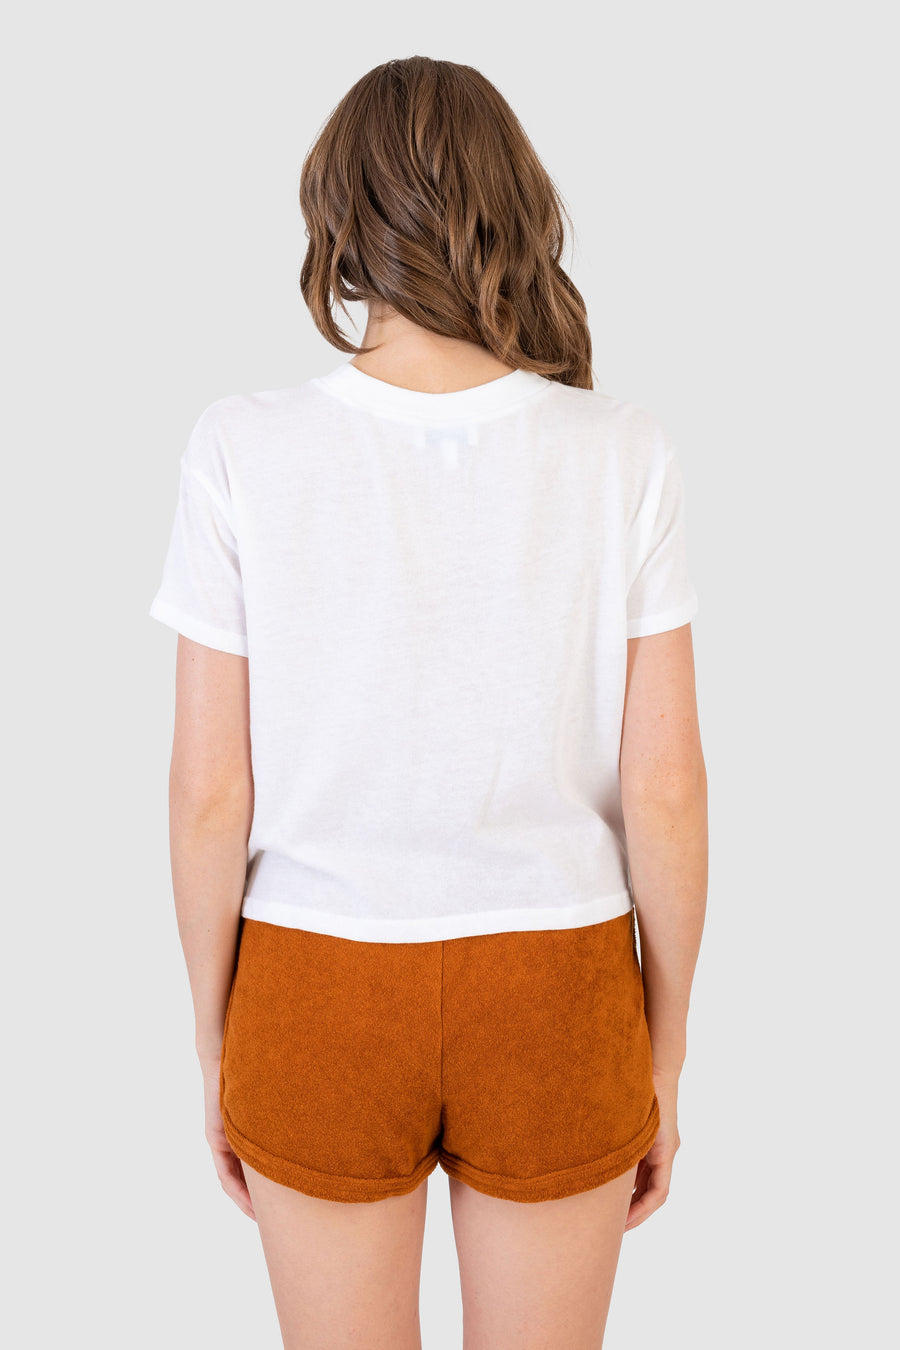 Cropped White Tee - Trophy Edition